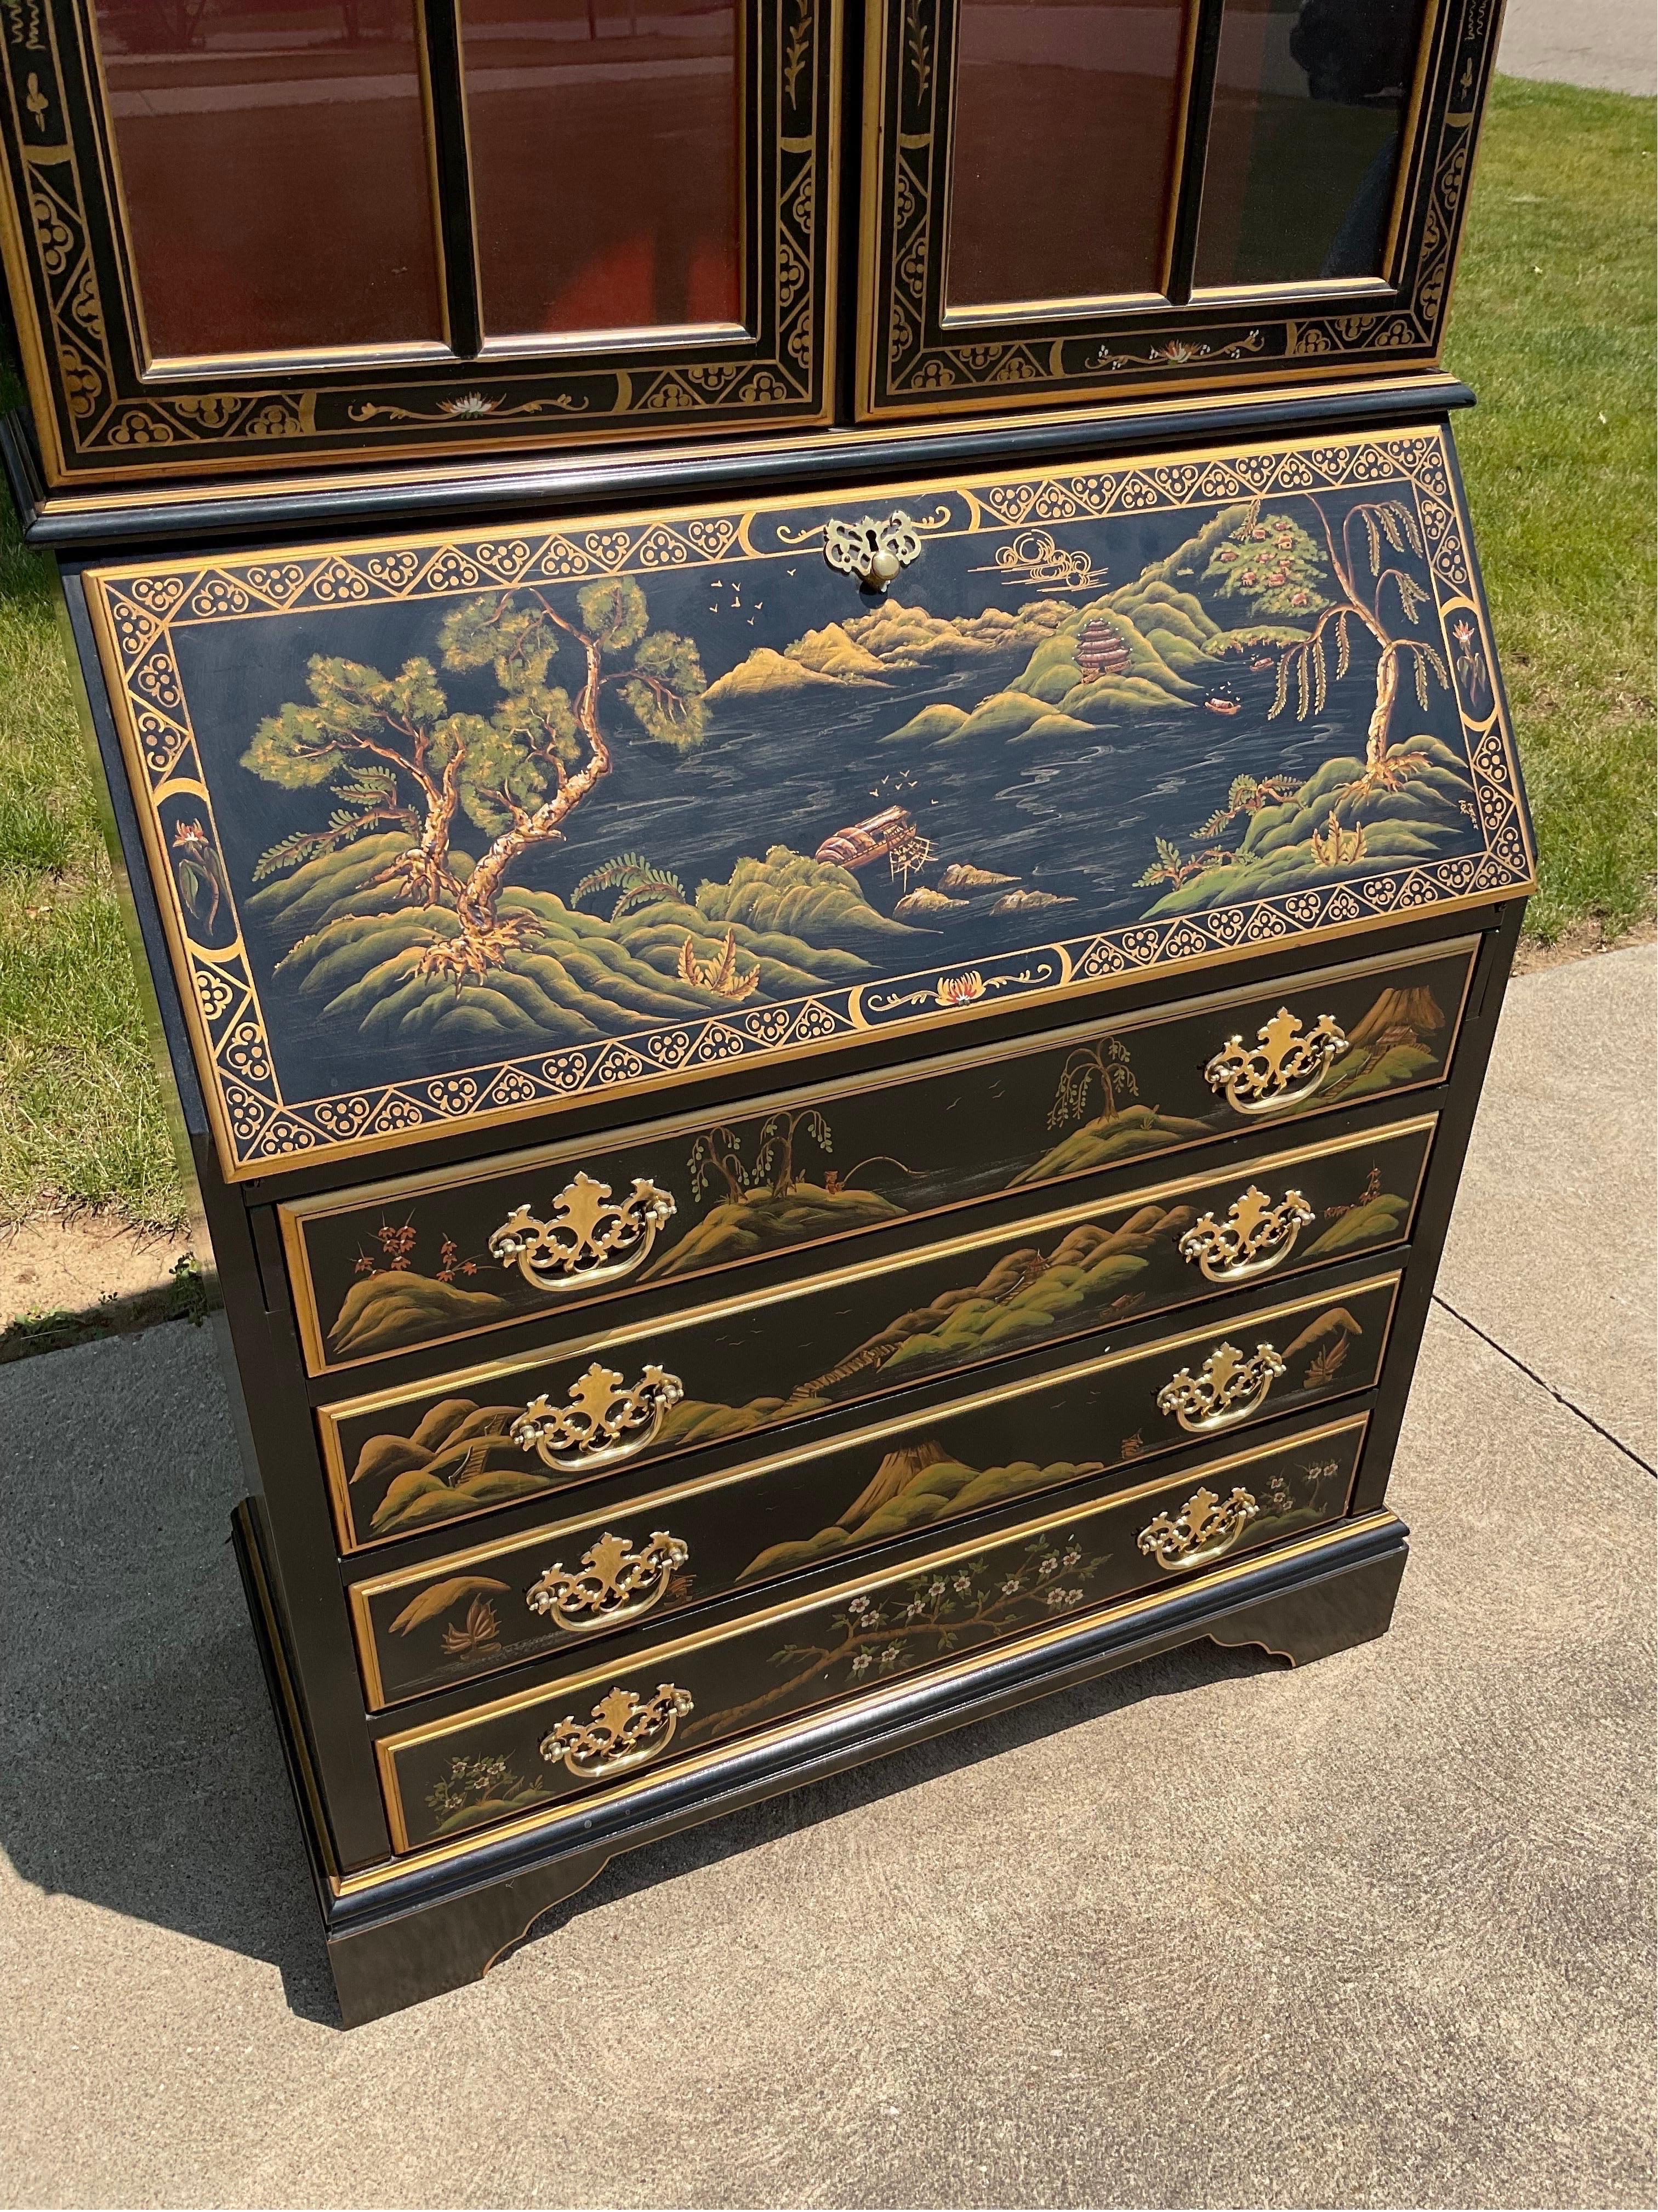 Beautiful piece. Pristine original condition. Very rare leather writing surface inset. Artist hand-painted scenes from the orient. 



Condition Disclosure:
Please understand nearly all of our inventory is comprised of rare to very rare vintage